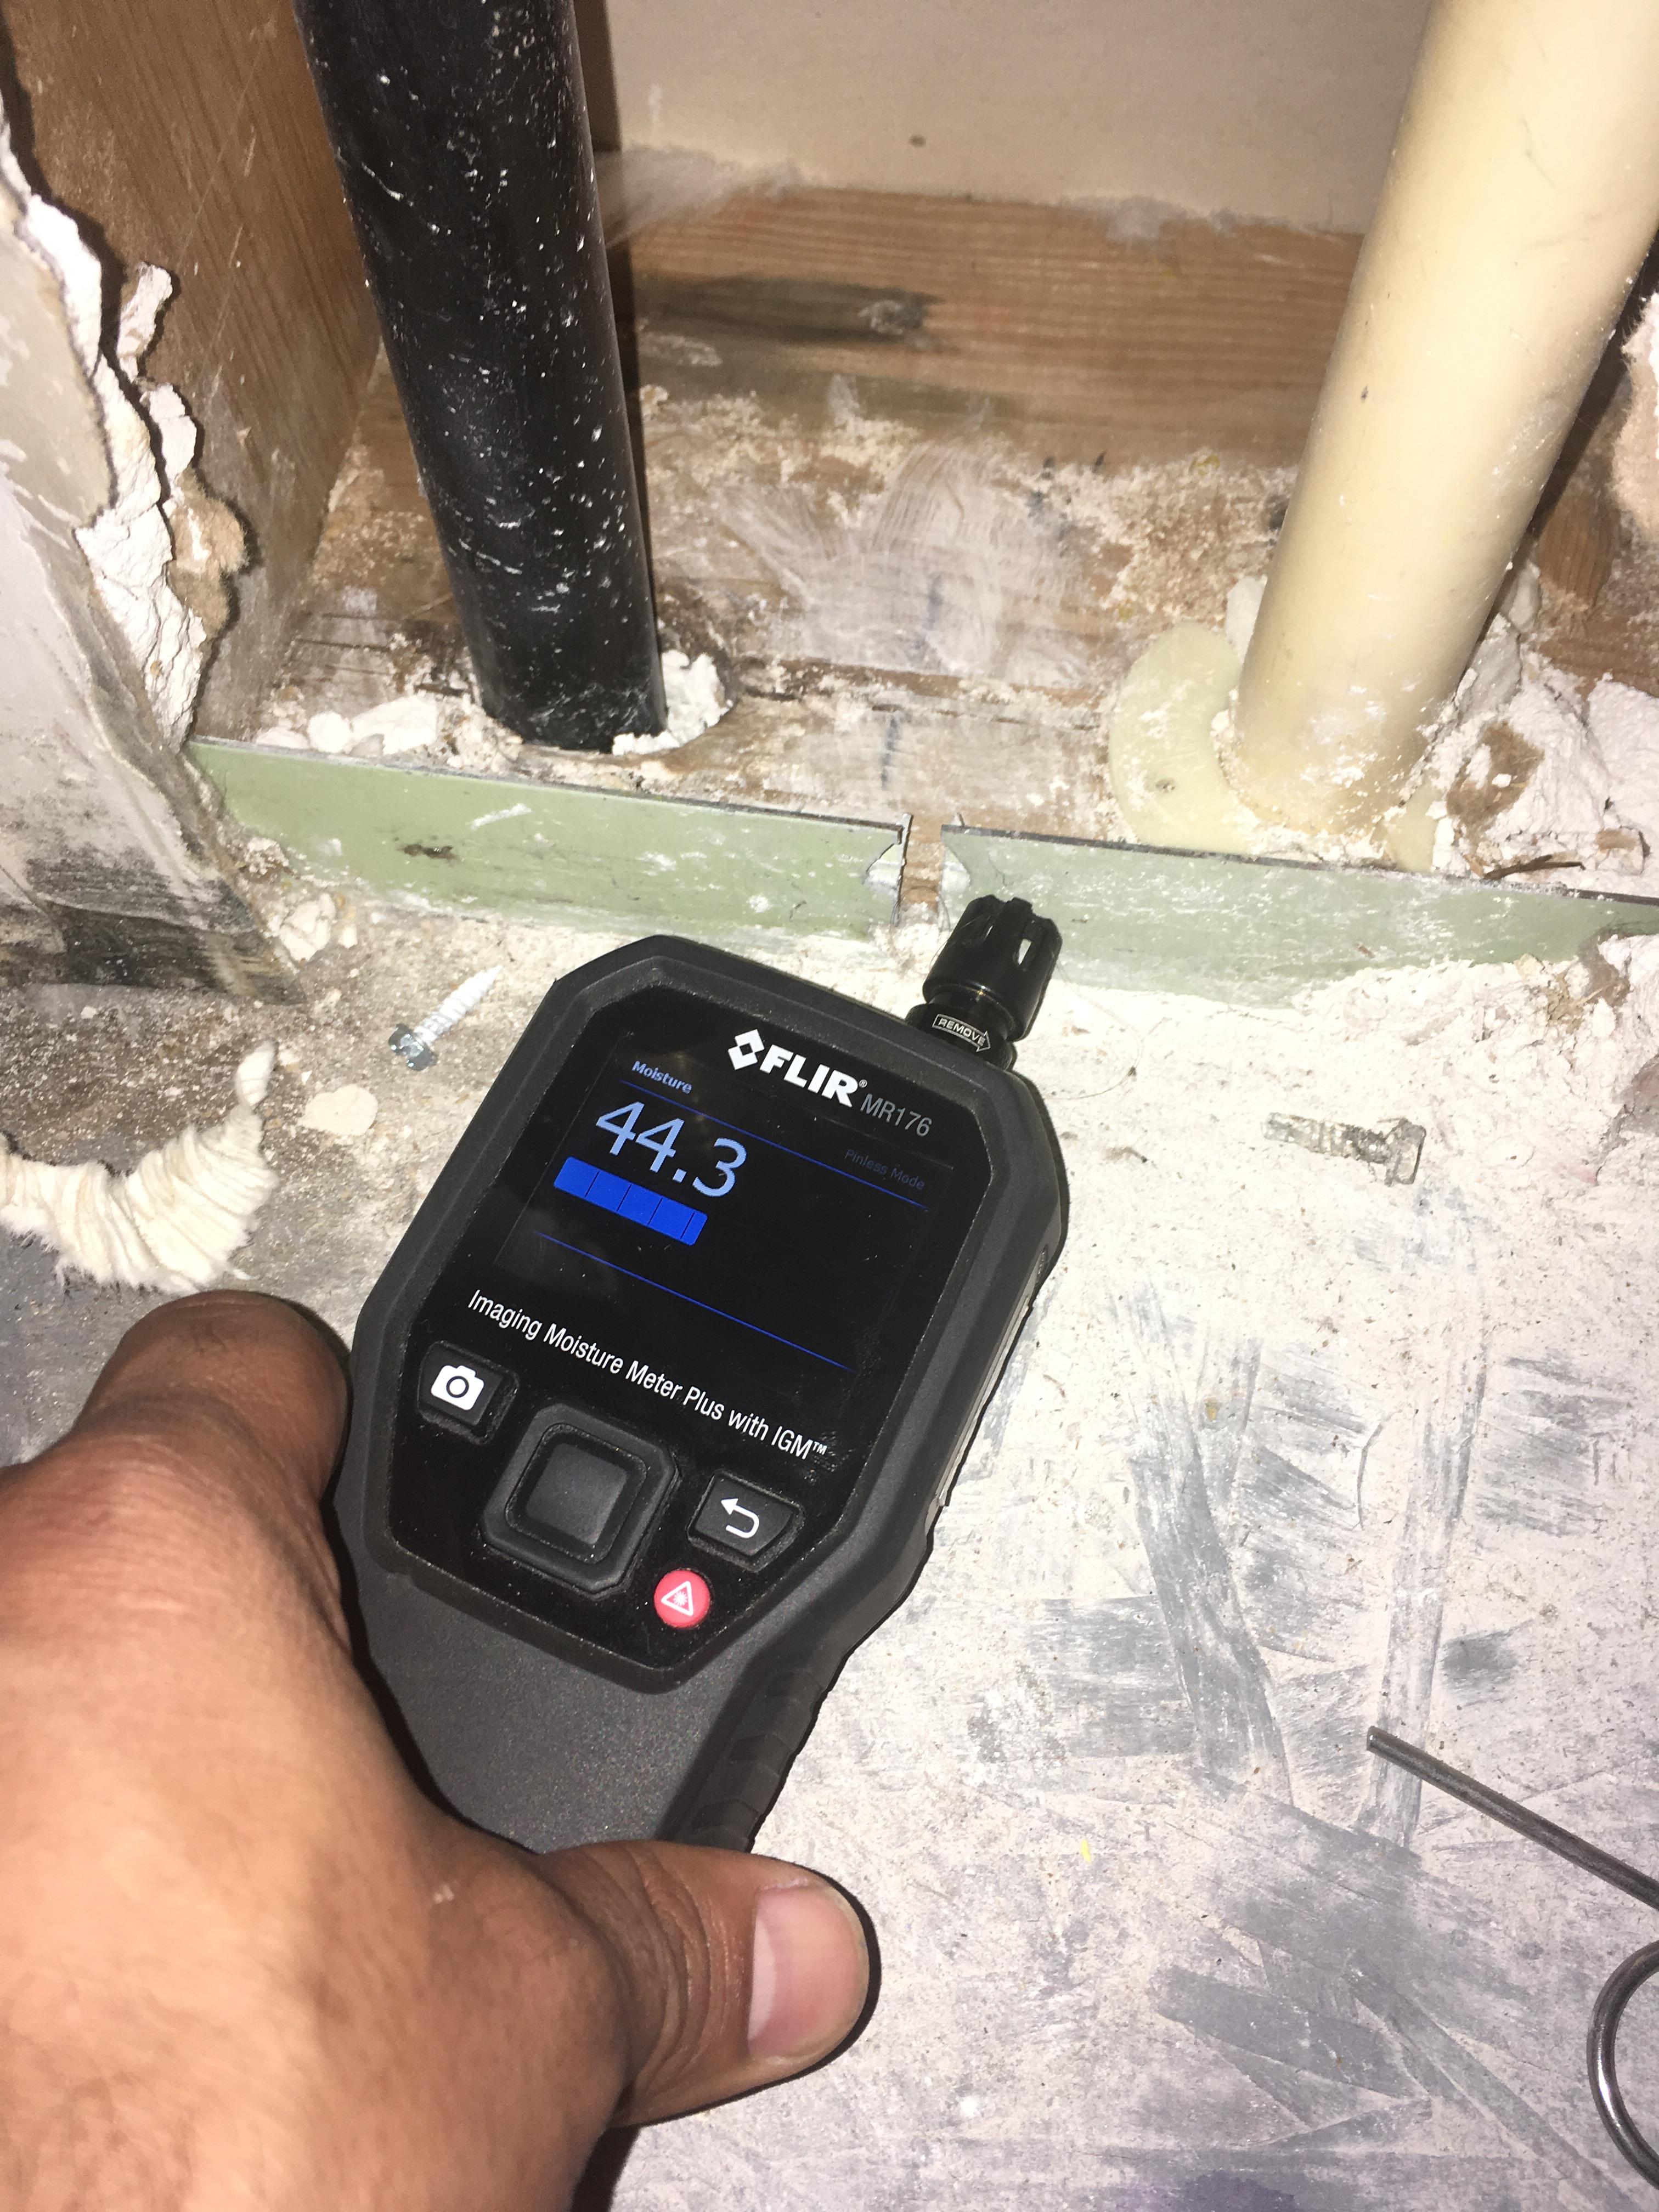 Moisture meter indicating there is water underneath this floor.